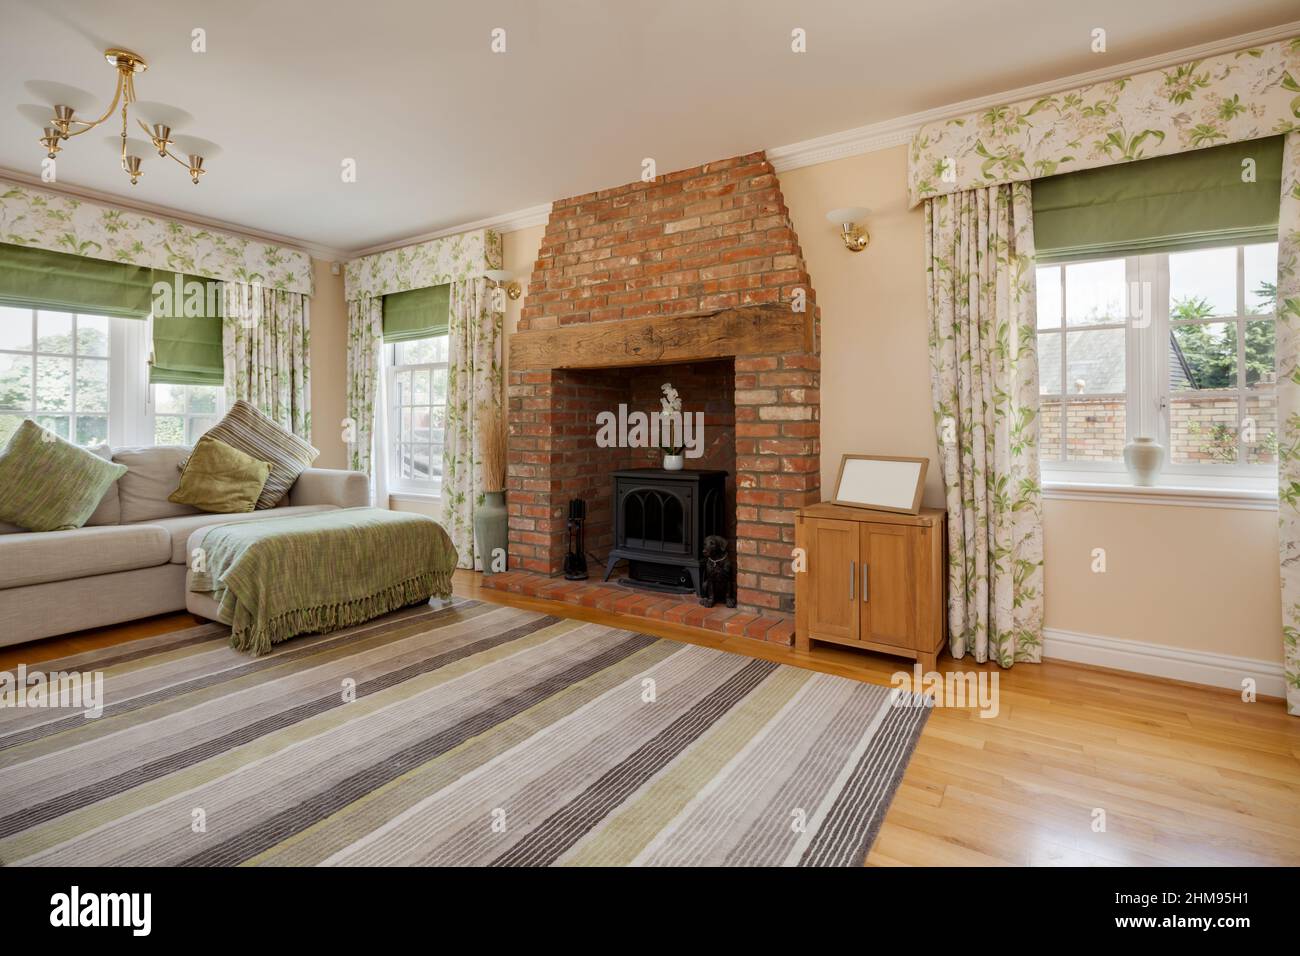 Burrough Green, Suffolk - July 12 2018: Modern luxury living room with heavily patterned rug and inglenook style fireplace in exposed brick, dual aspe Stock Photo